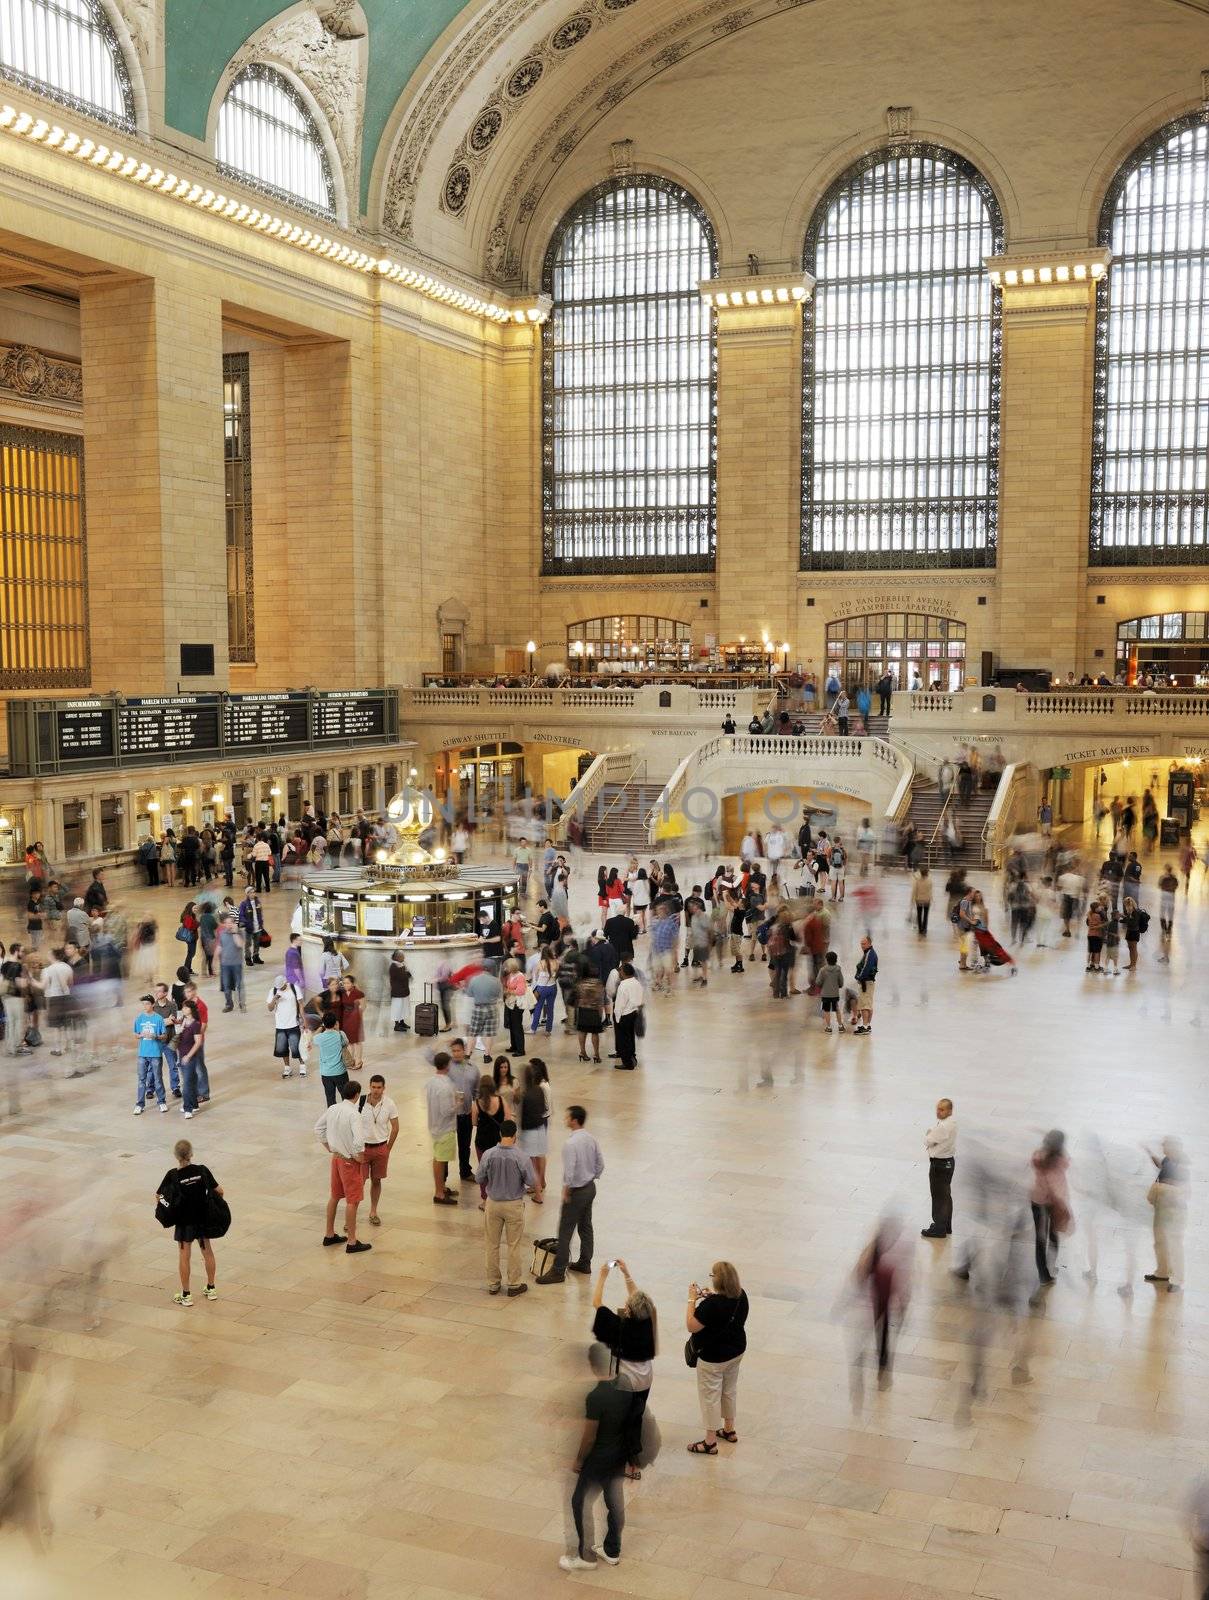 NEW YORK CITY, USA - JUNE 9: Grand Central Terminal is a commuter rail terminal station at 42nd Street and Park Avenue in Midtown Manhattan. June 9, 2012 in New York City, USA